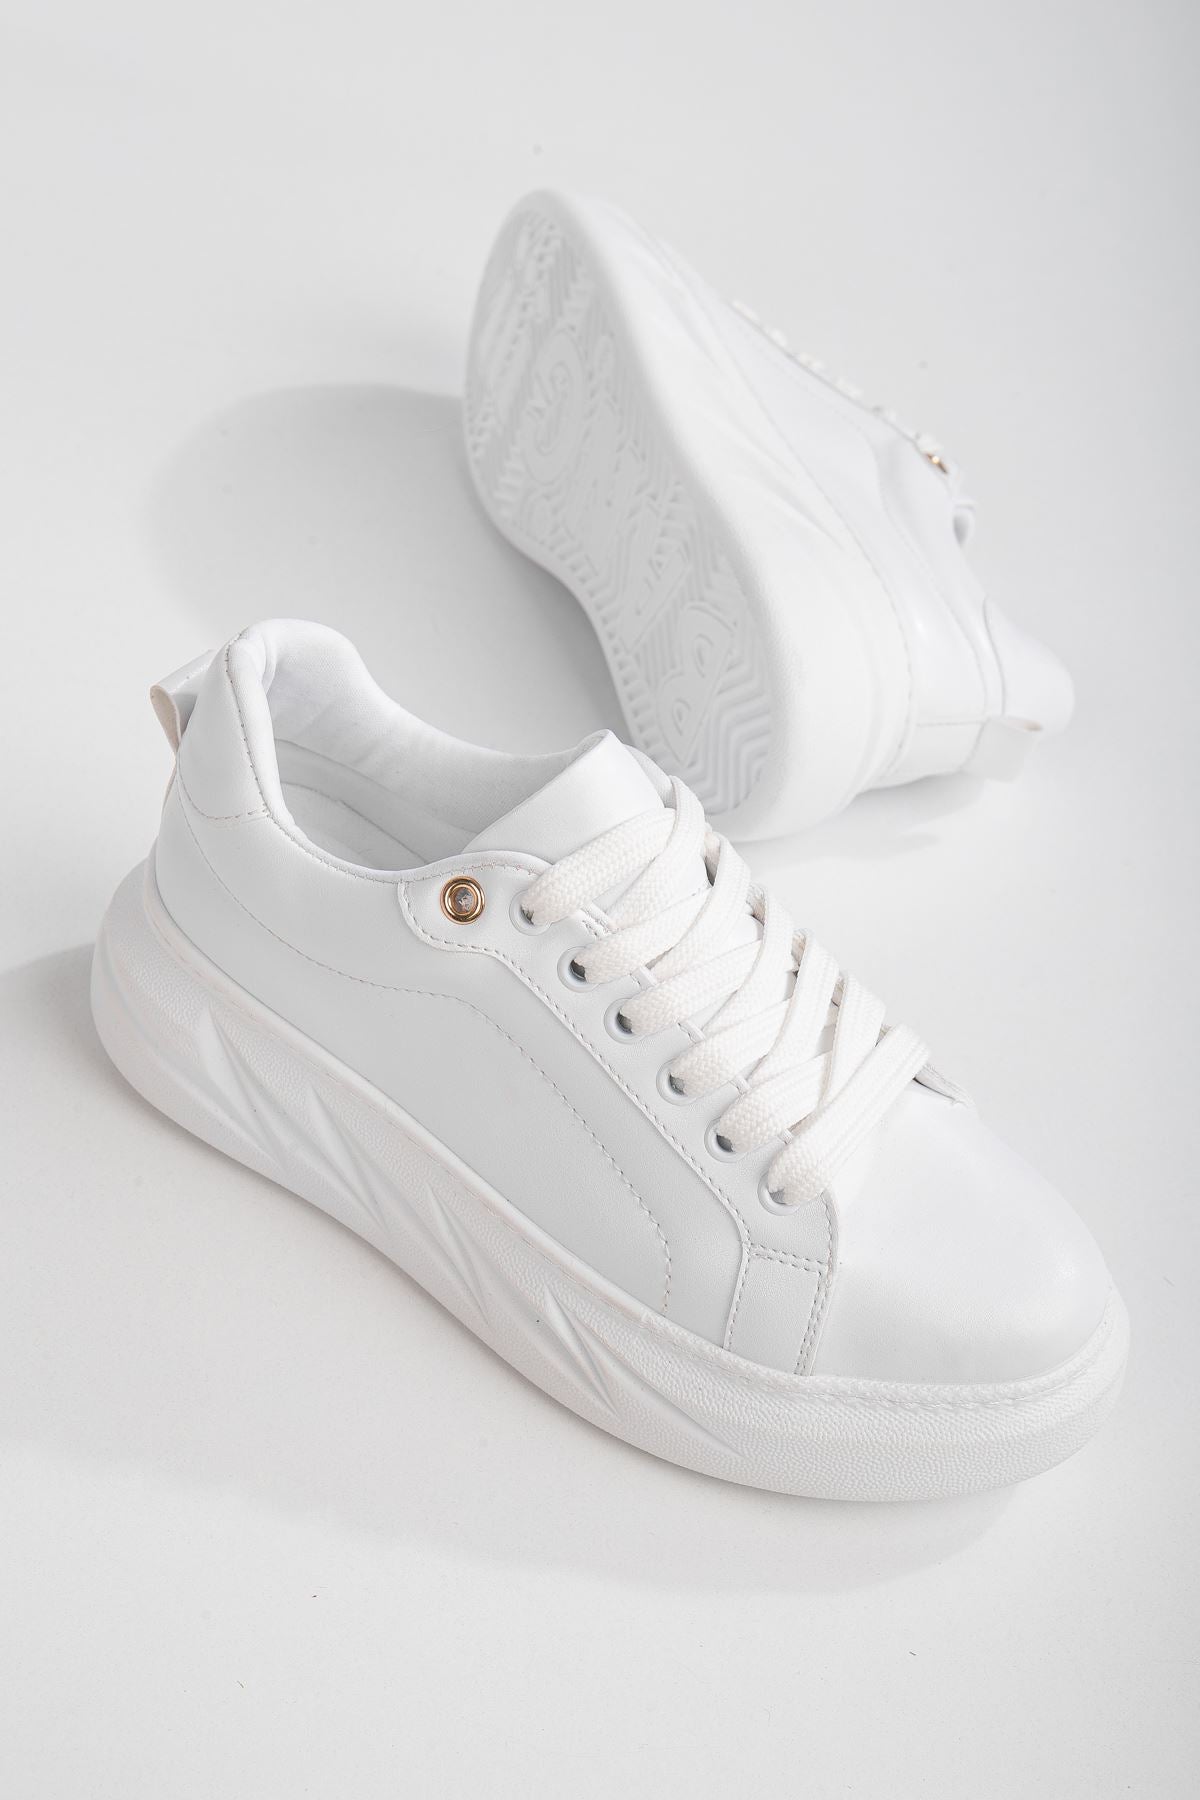 Women's Nerina White Skin Thick Sole Detailed Sneakers - STREETMODE ™